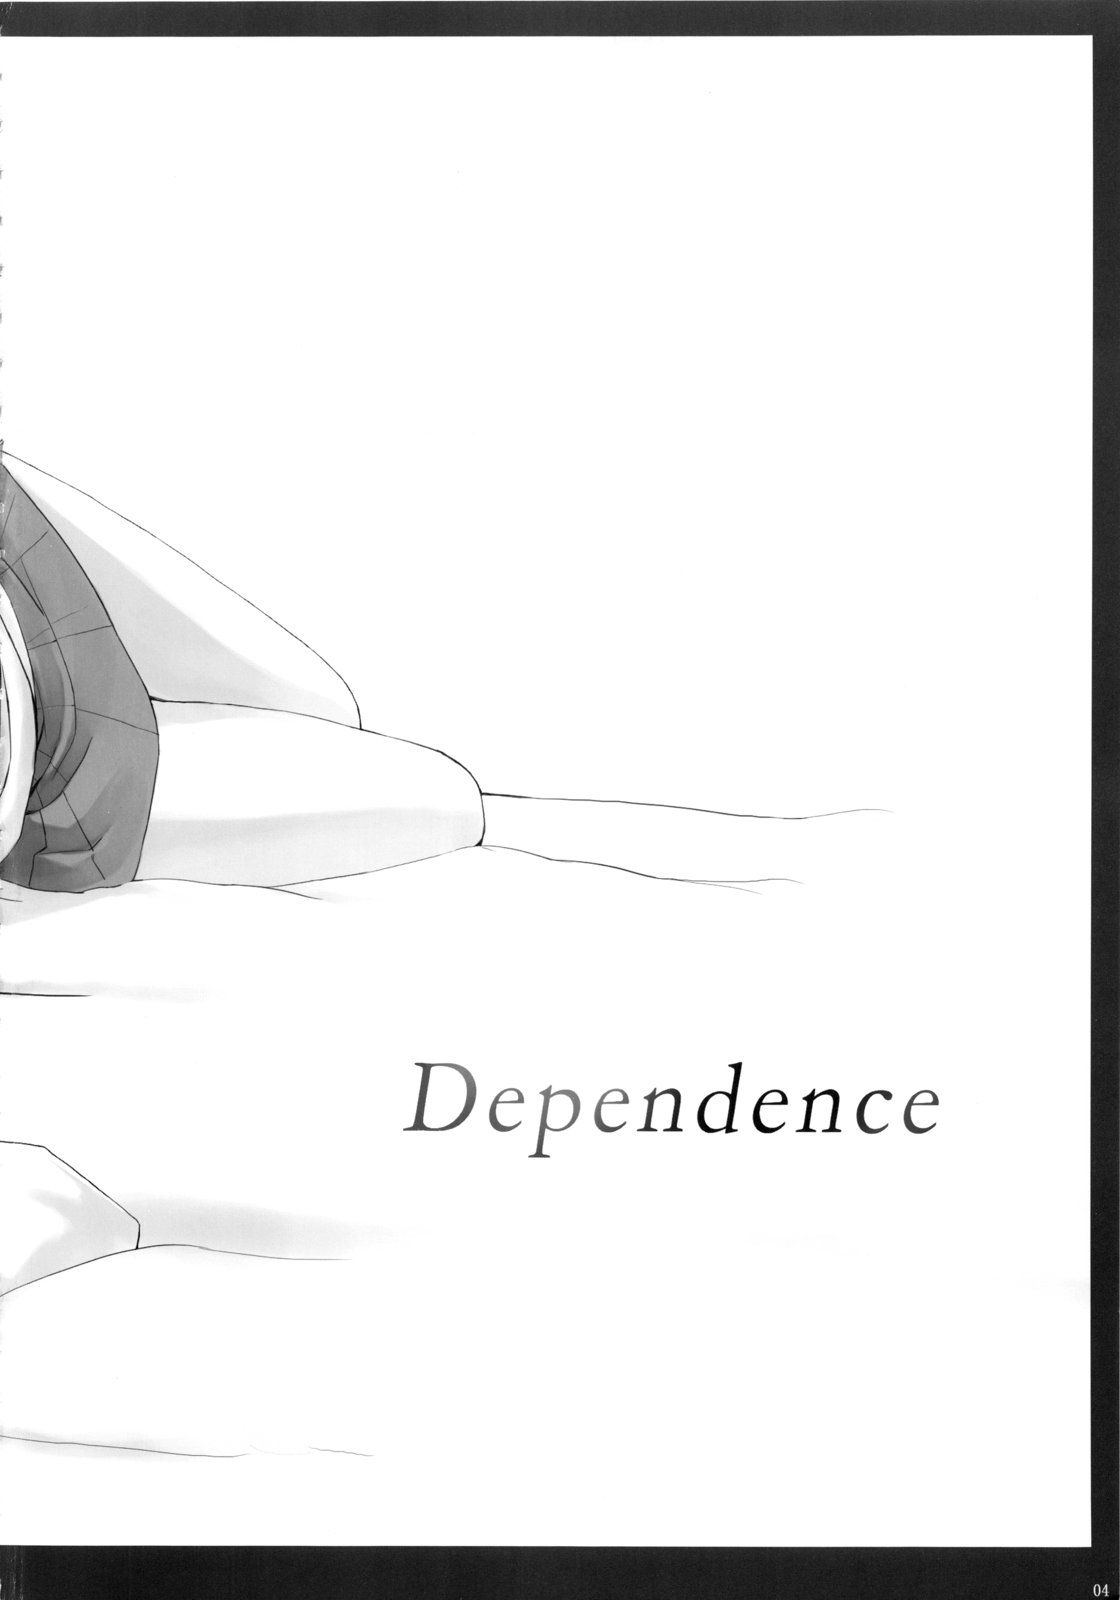 (COMIC1☆3) [Cior (ken-1)] Dependence -Finished limited edition- (ToHeart2)